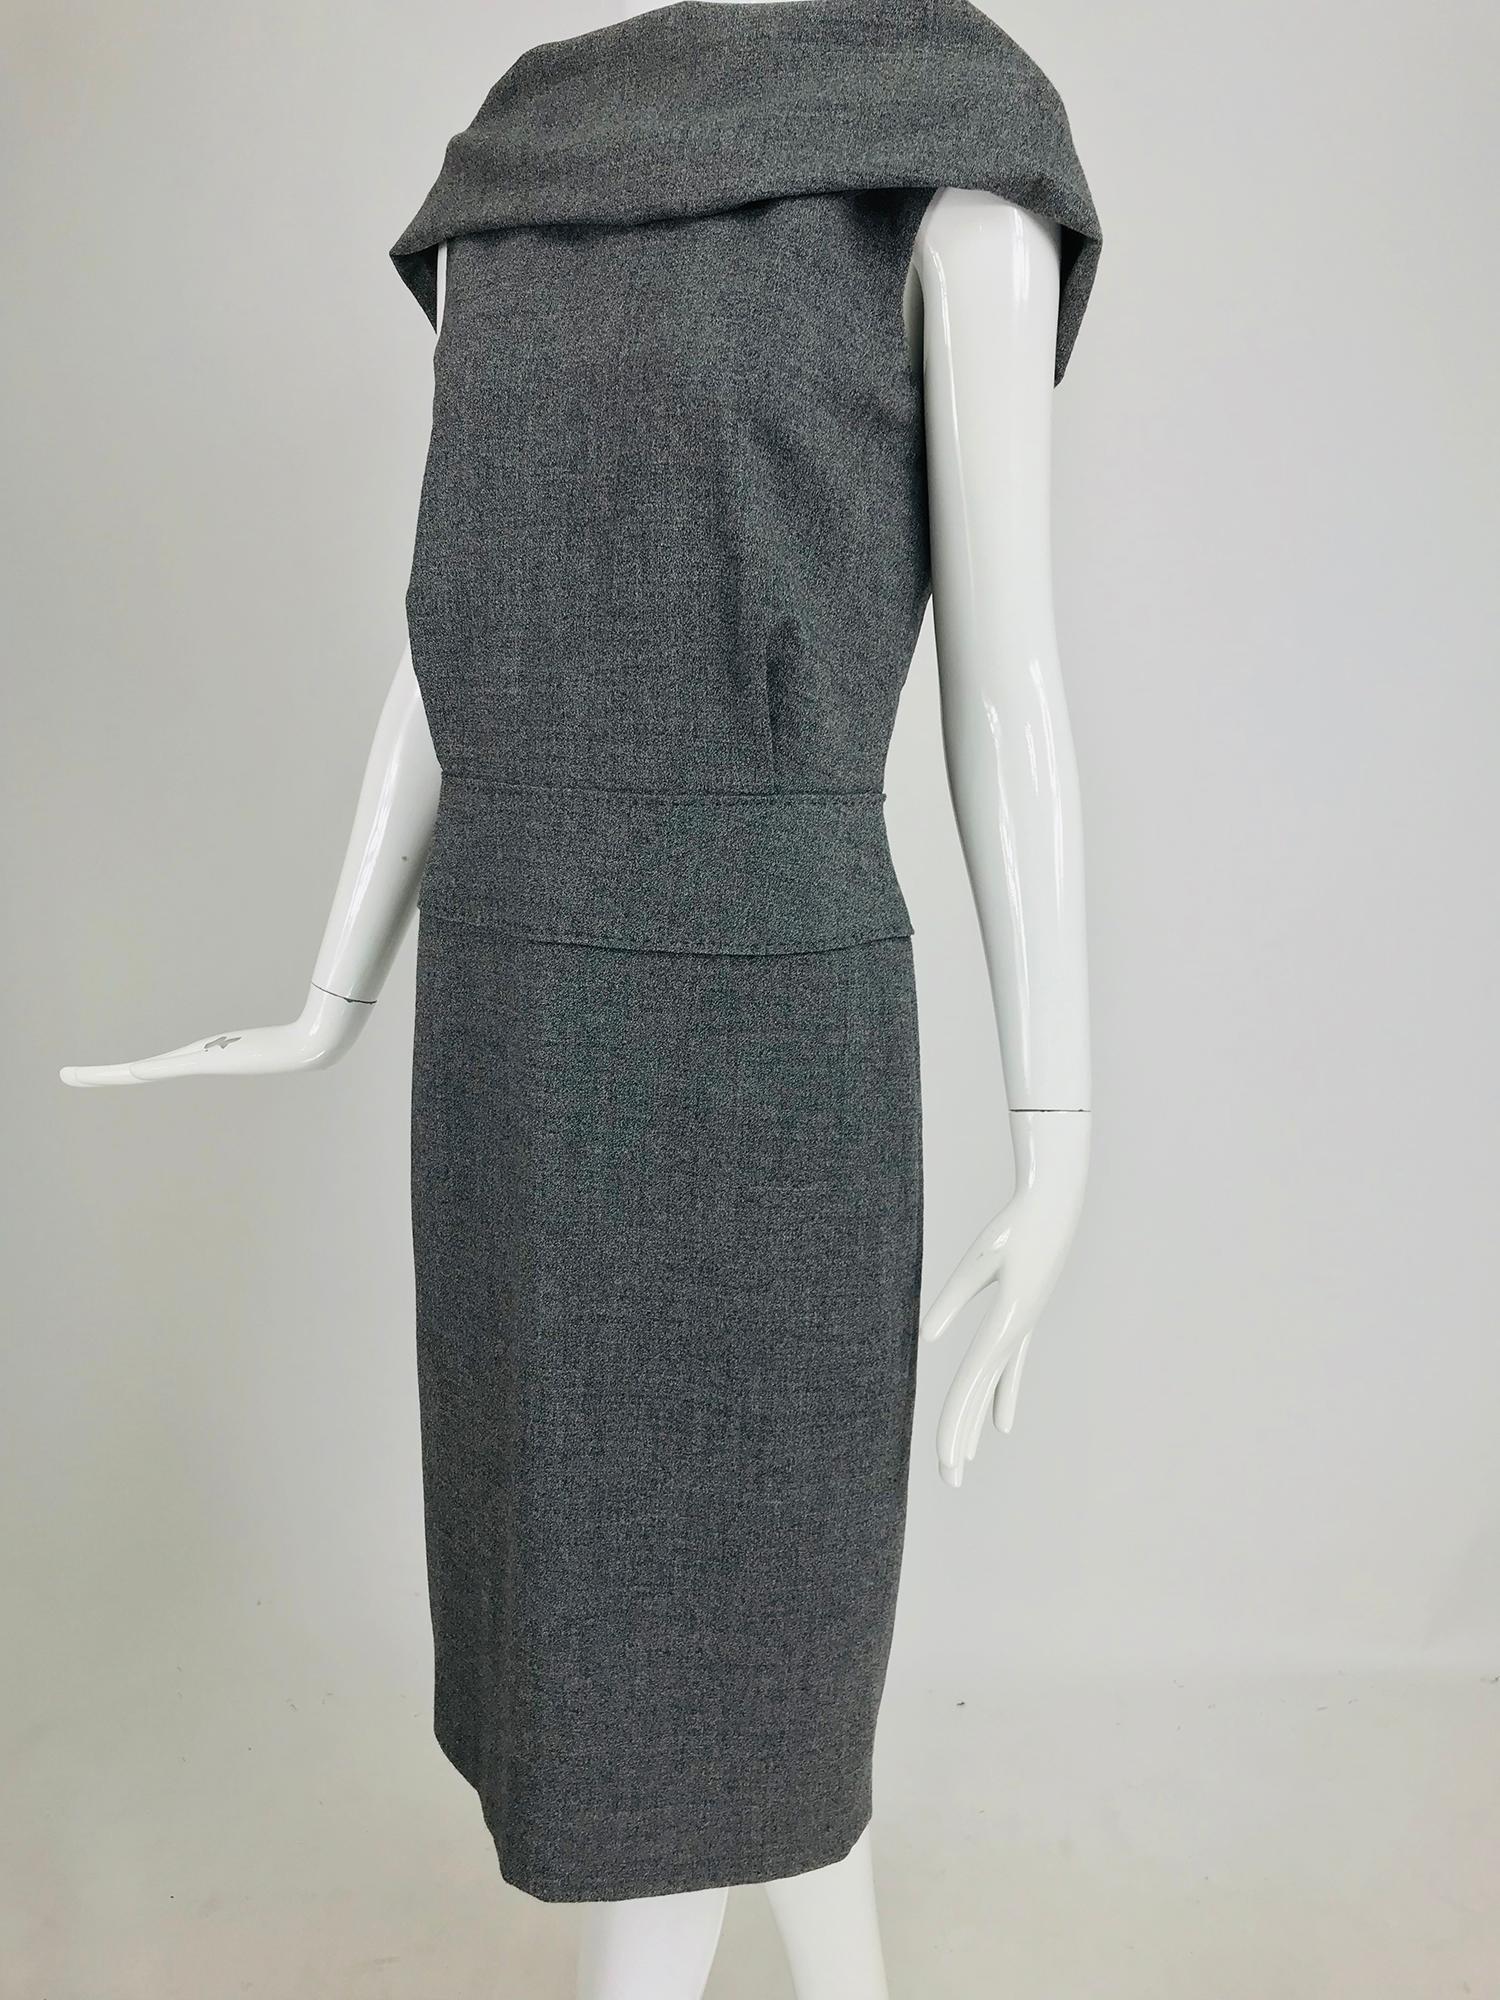 Alexander McQueen Grey Wool V Back Fitted Sheath Dress. This chic little dress has lots of great details going for it like the draped cowl neckline at the front and the deep V back. I especially like the shaped band at the hip with it's hand done